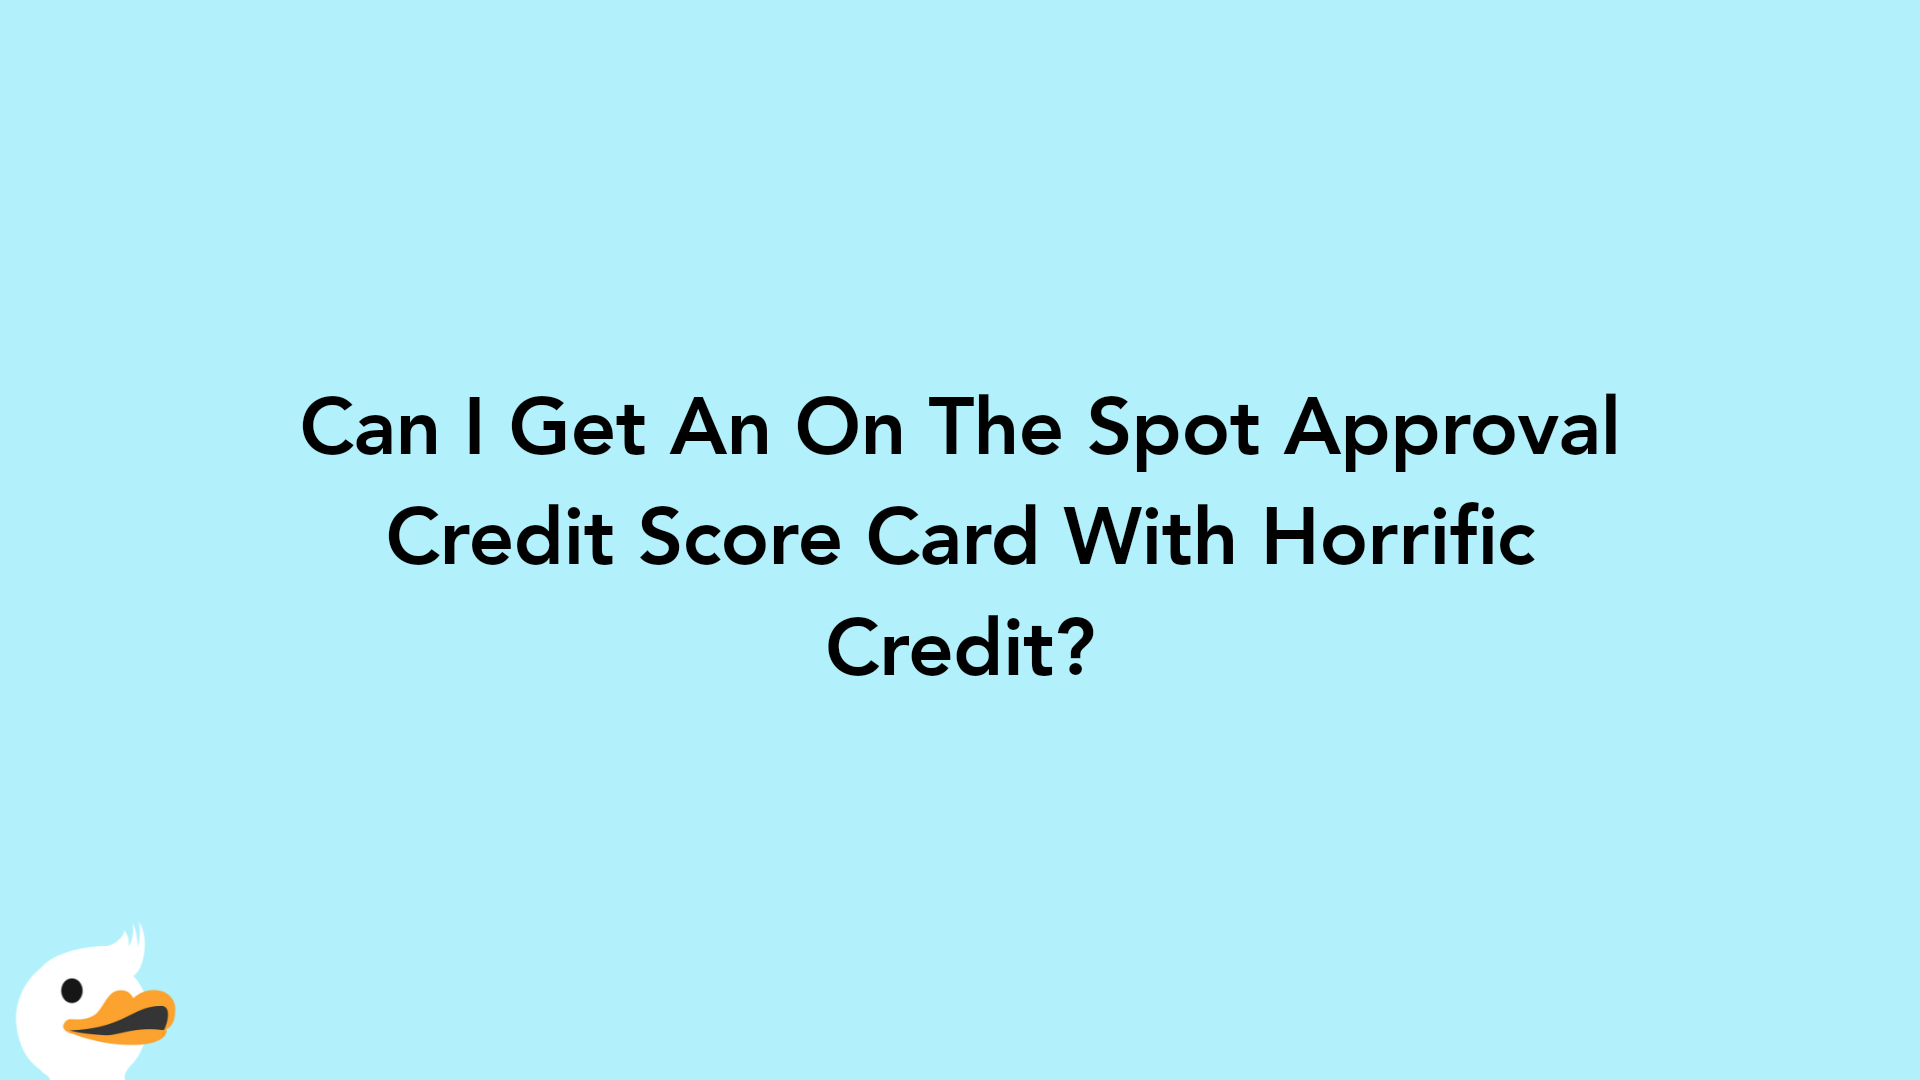 Can I Get An On The Spot Approval Credit Score Card With Horrific Credit?